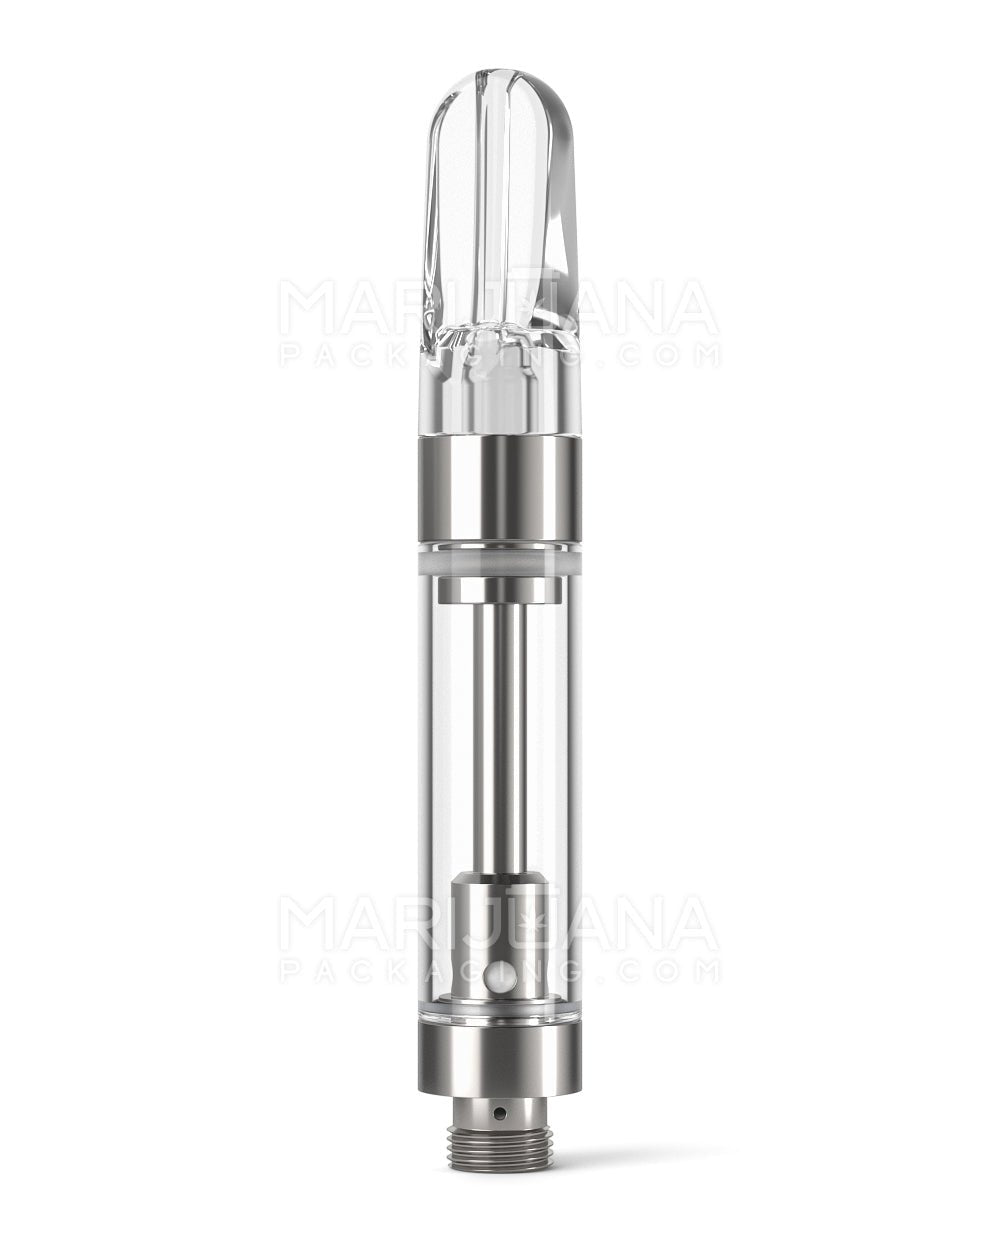 Ceramic Core Glass Vape Cartridge with Flat Clear Plastic Mouthpiece | 1mL - Press On - 1600 Count - 1